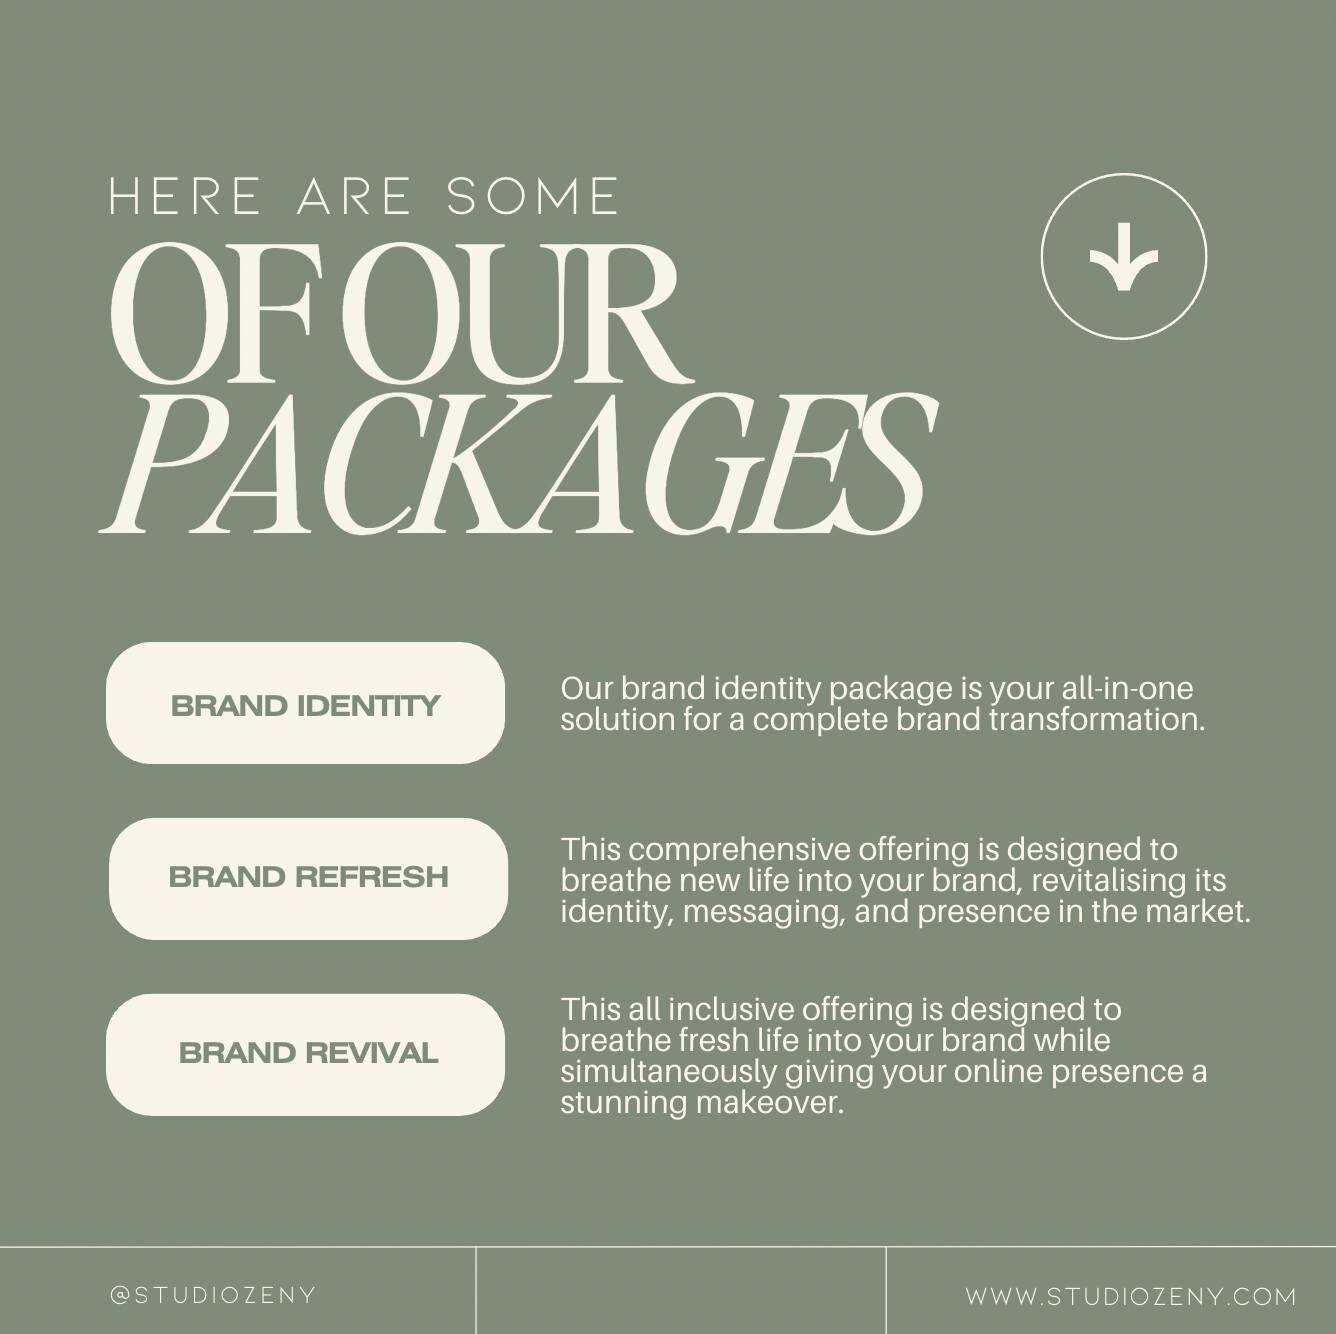 Why choose Studio Zeny's packages? 

Our packages are designed to be worthwhile investments, offering not just services but strategic solutions that elevate your brand 🙌🏼 ✨

Unlock the full potential of your business with Studio Zeny's thoughtfully